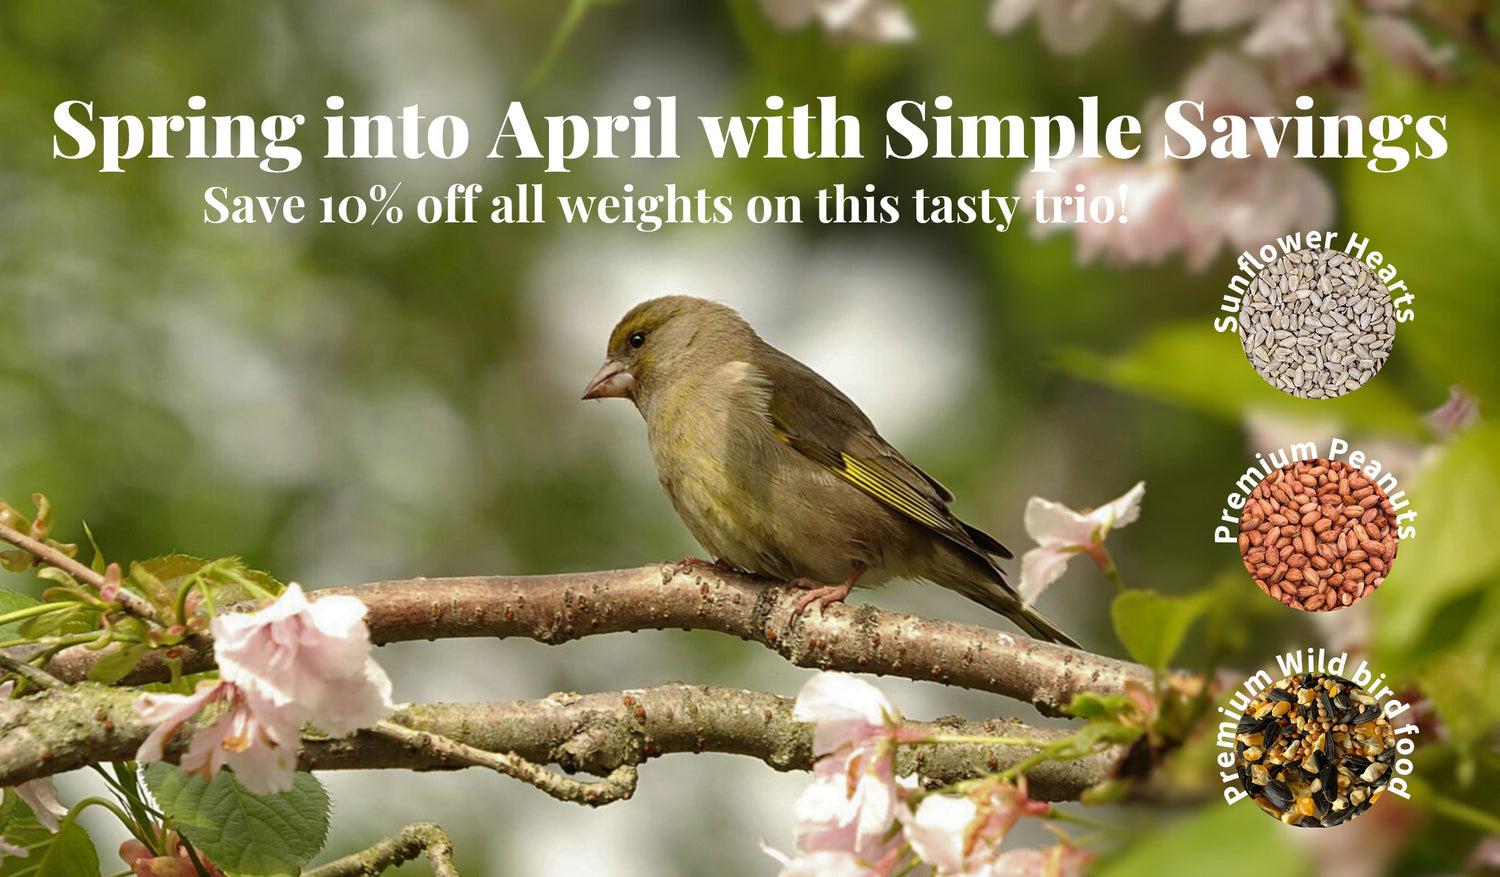 Bird food savings on sunflower hearts premium peanuts and wild bird food showing image of a Greenfinch sitting on a branch and spring blossom.